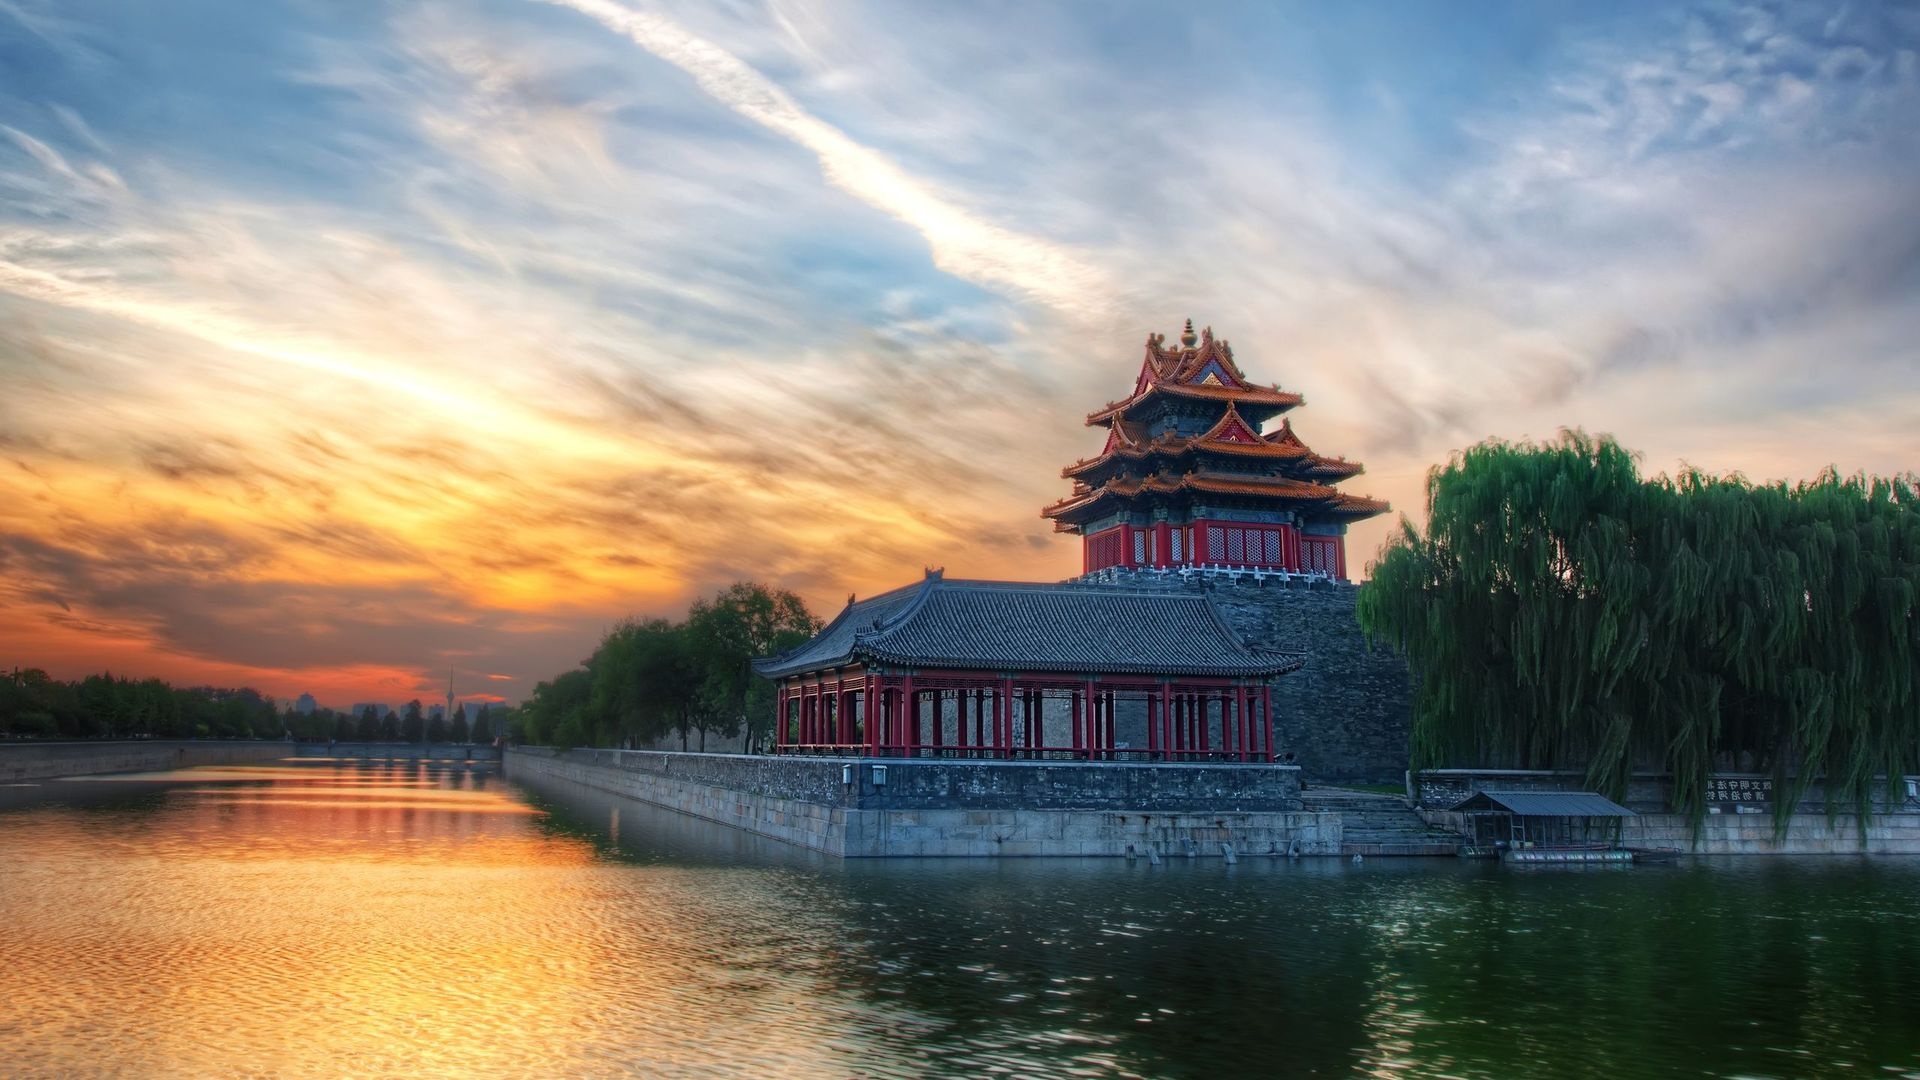 The Summer Palace, Beijing wallpapers, Chinese heritage, Captivating cityscapes, 1920x1080 Full HD Desktop